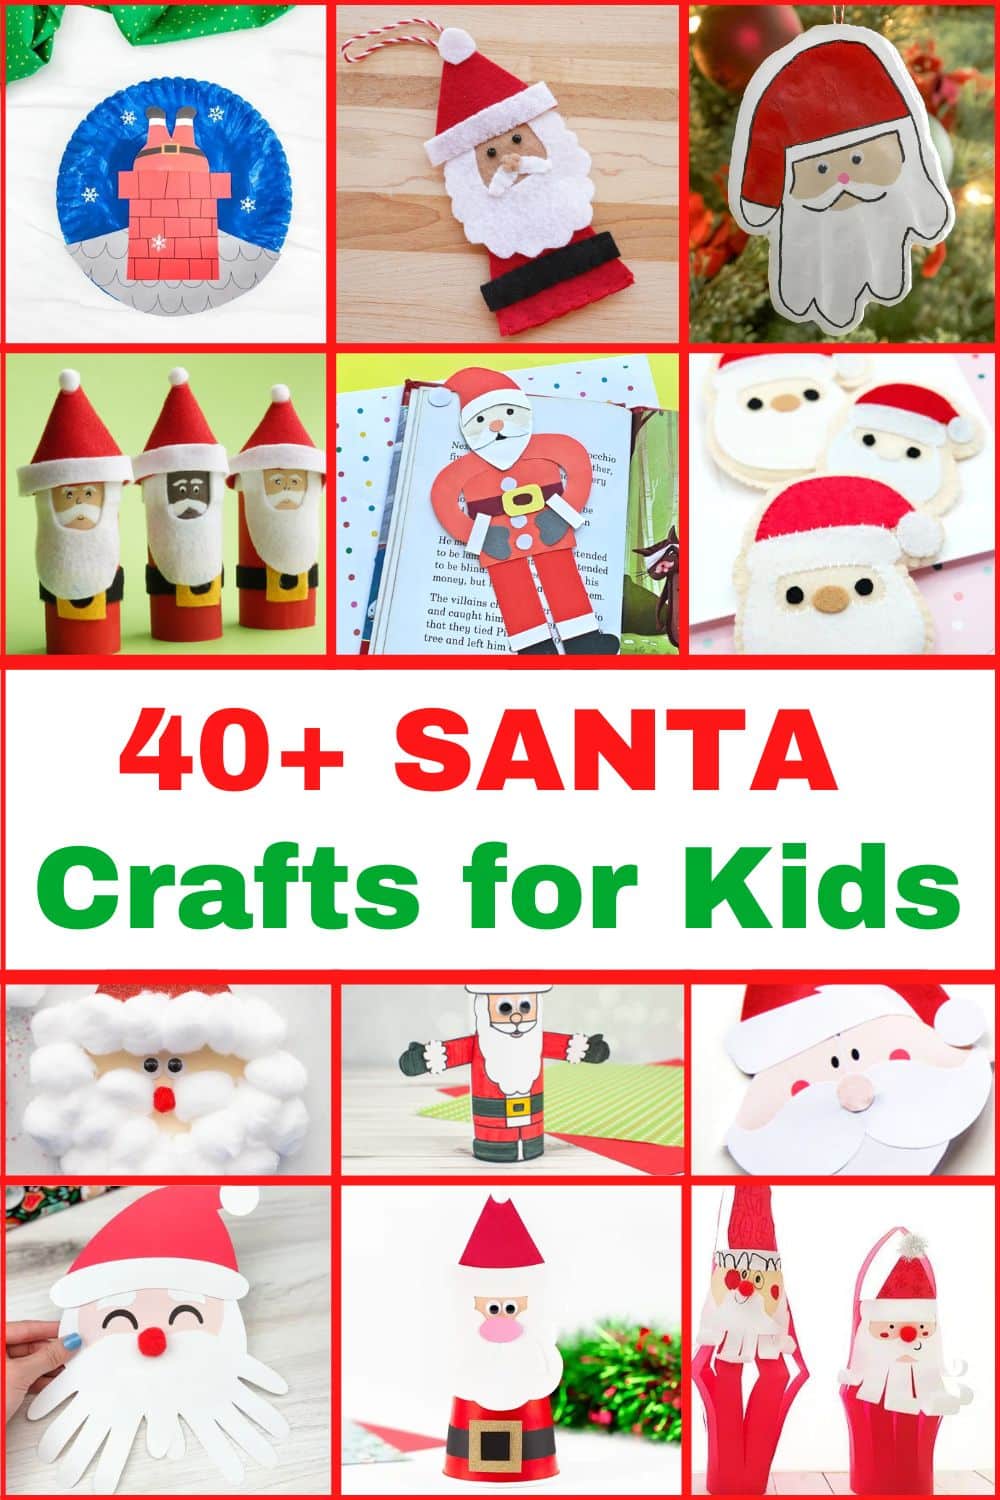 collage of Santa crafts for kids with title 